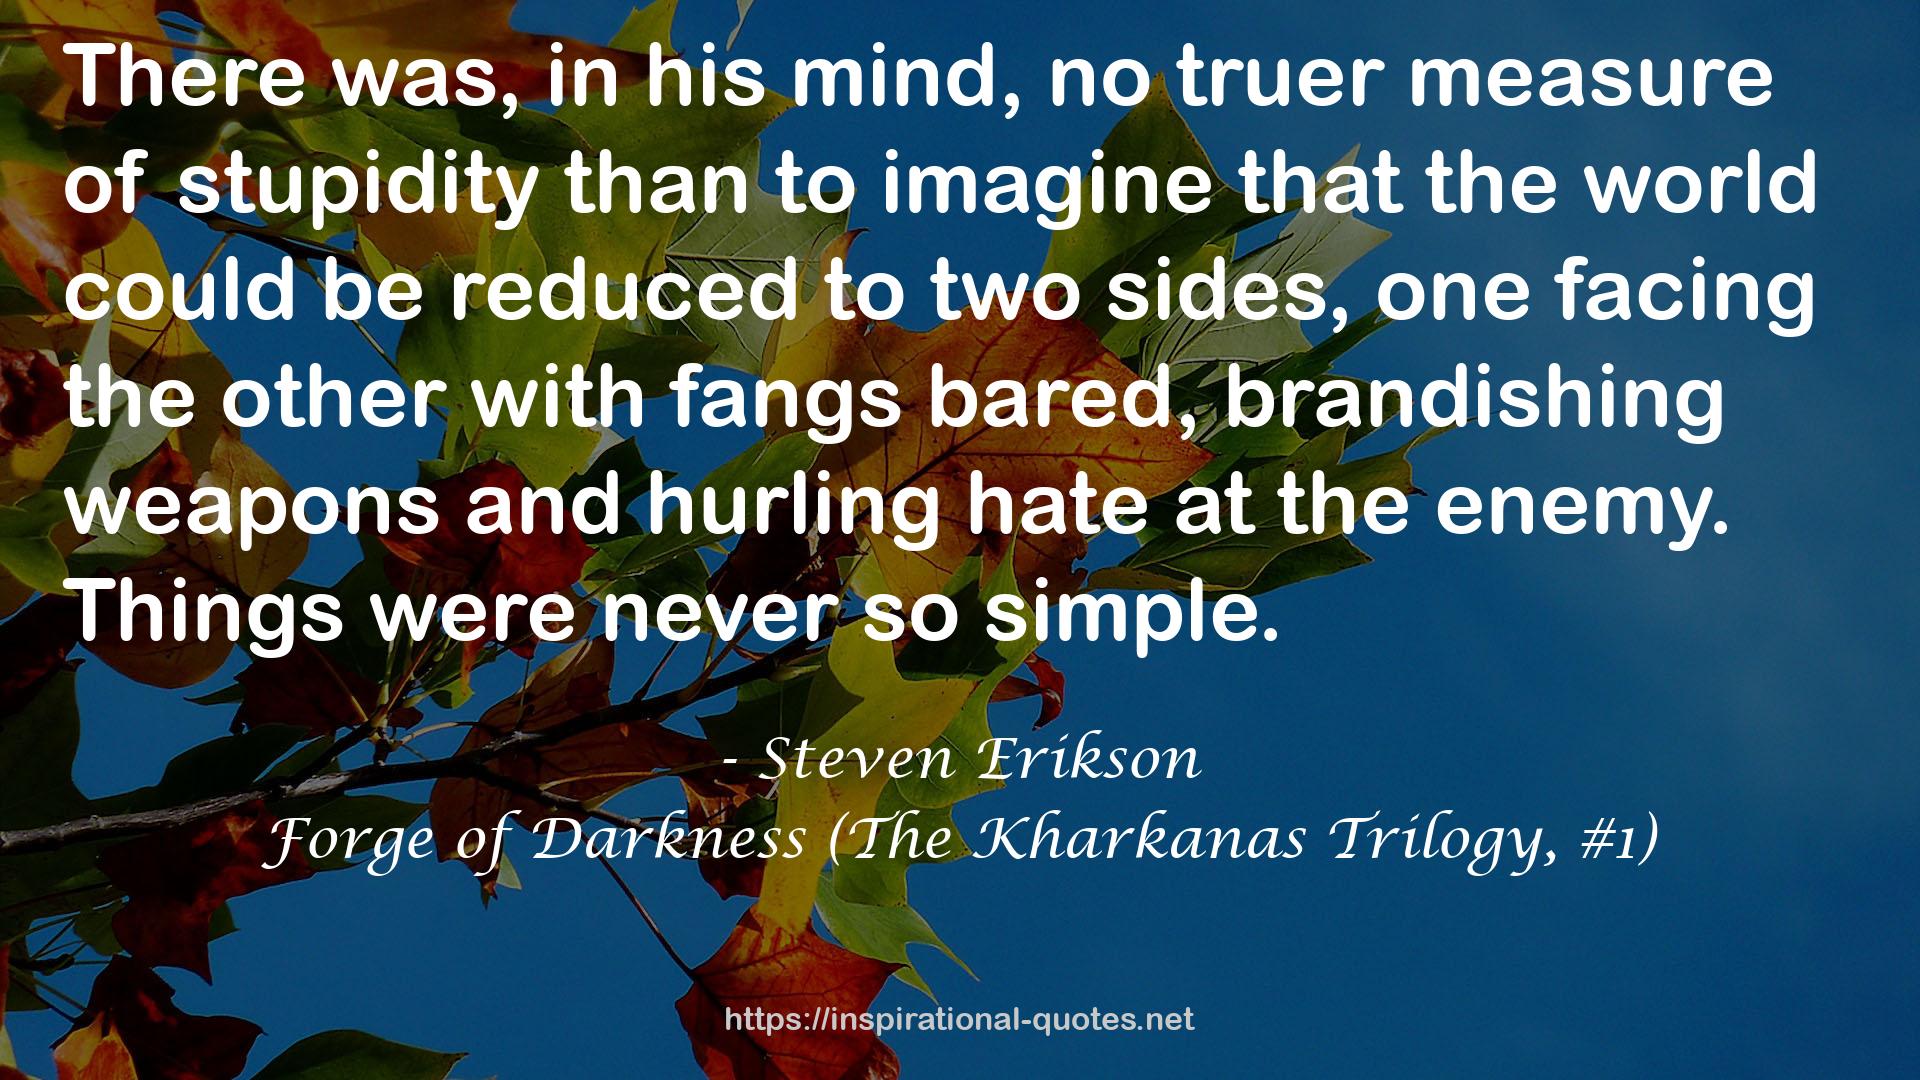 Forge of Darkness (The Kharkanas Trilogy, #1) QUOTES